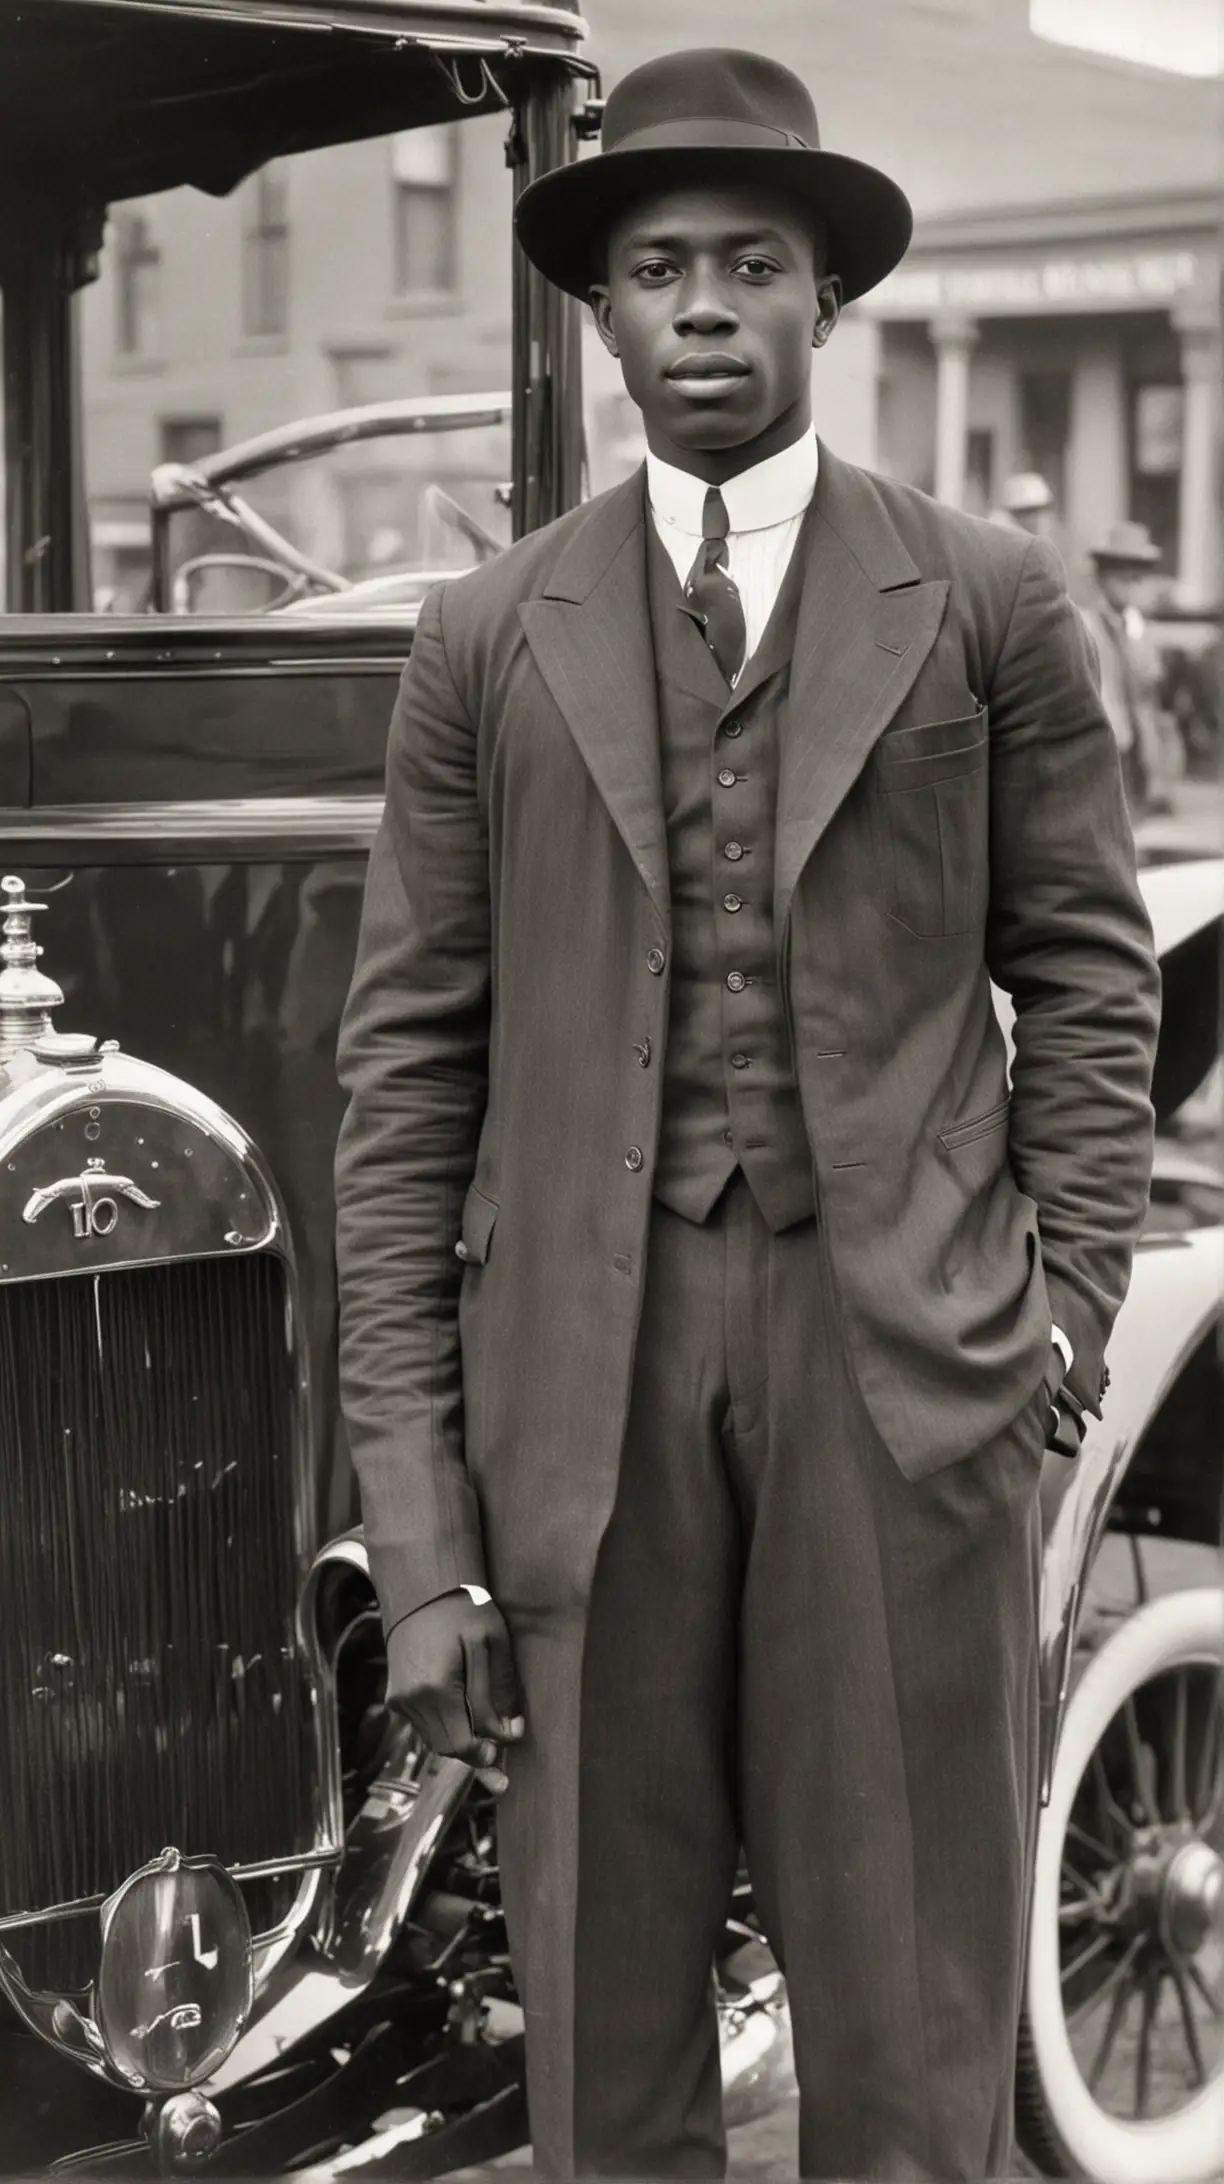 Handsome Black man with hat on standing in front of a Patterson-Greenfield automobile of 1915